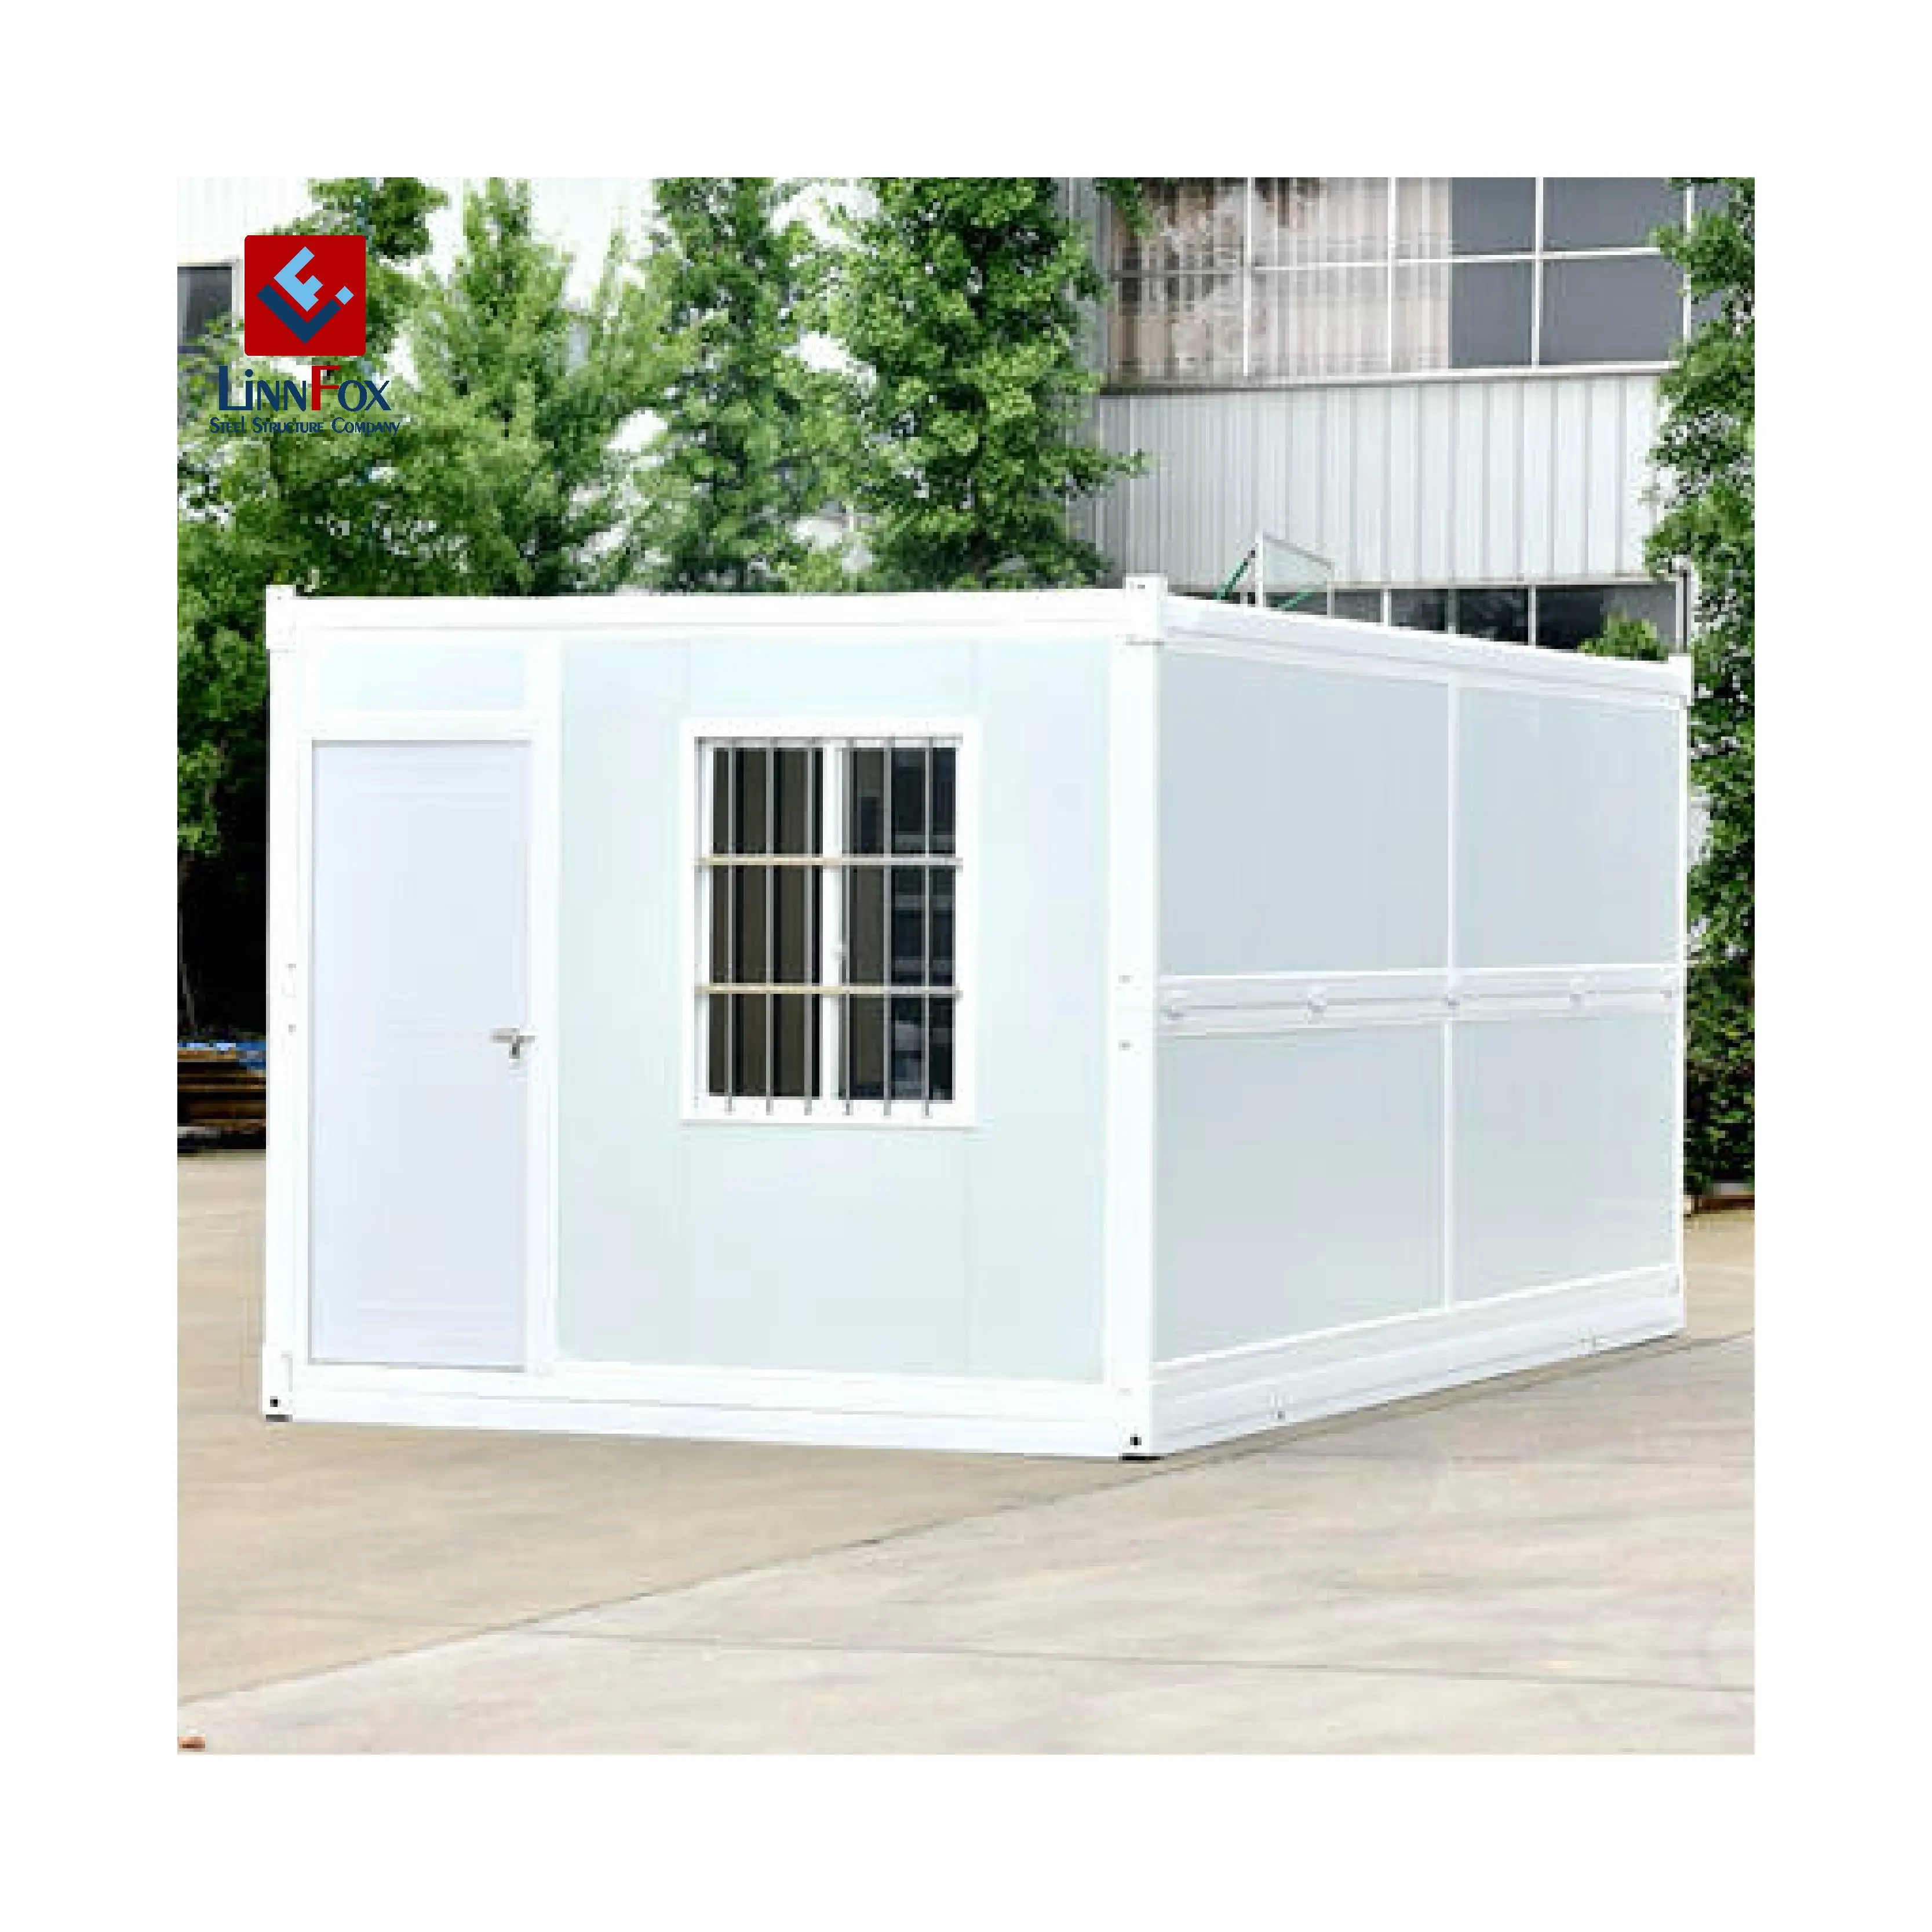 Snel Te Bouwen Prefab Huis 20ft 40ft Modulaire Opvouwbare Container Home Camping Opvouwbare Kleine Thuiscontainer Home Office